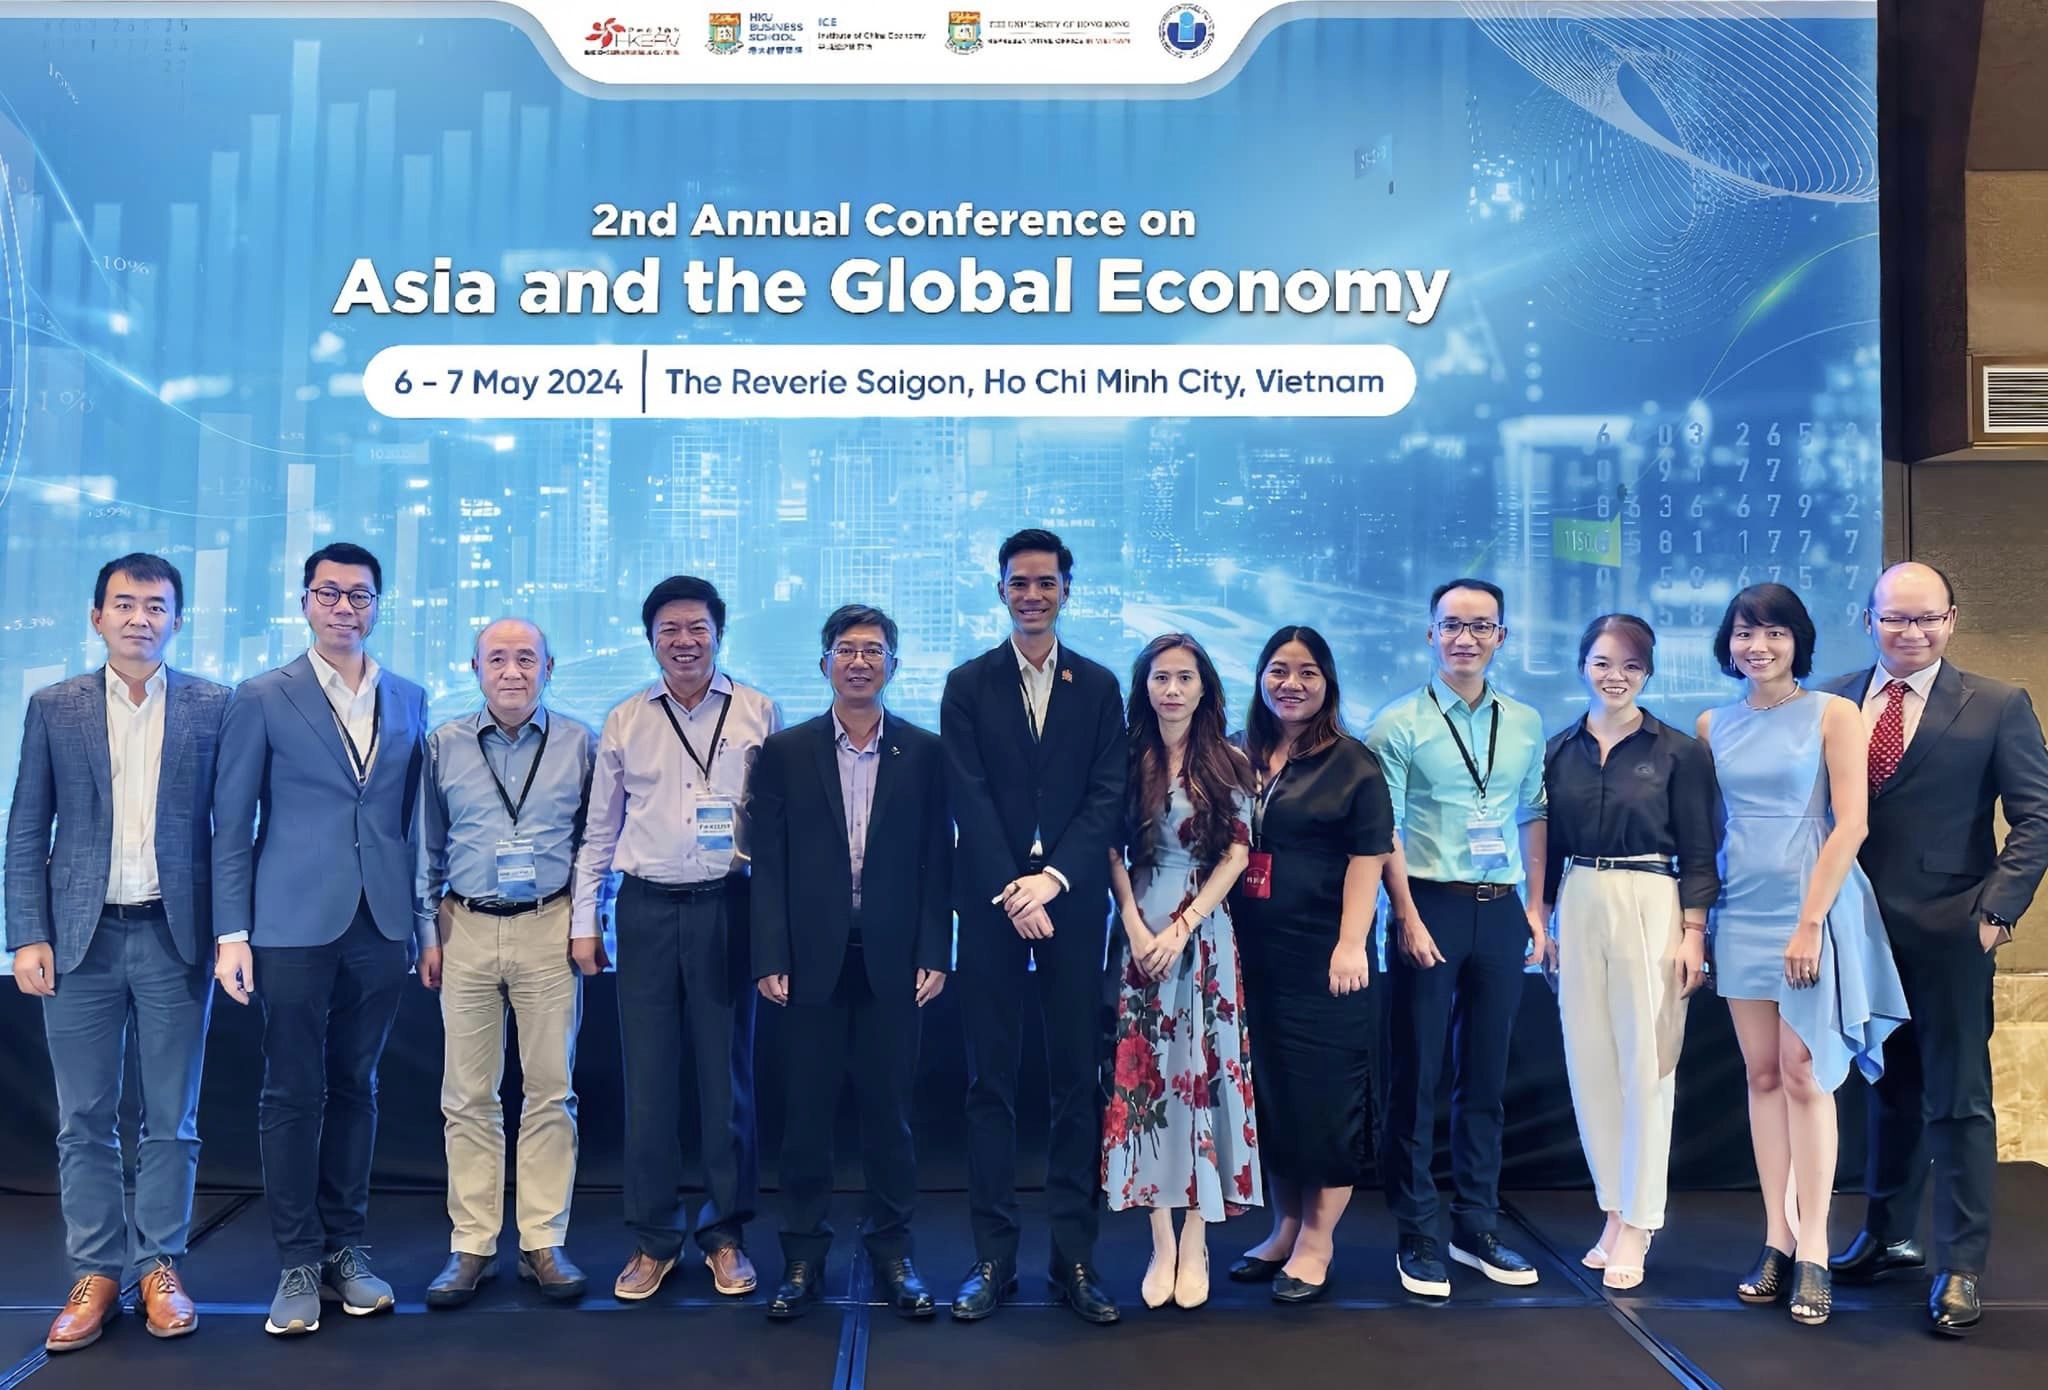 Memorable images at the 2nd Annual Conference on Asia and the Global Economy!